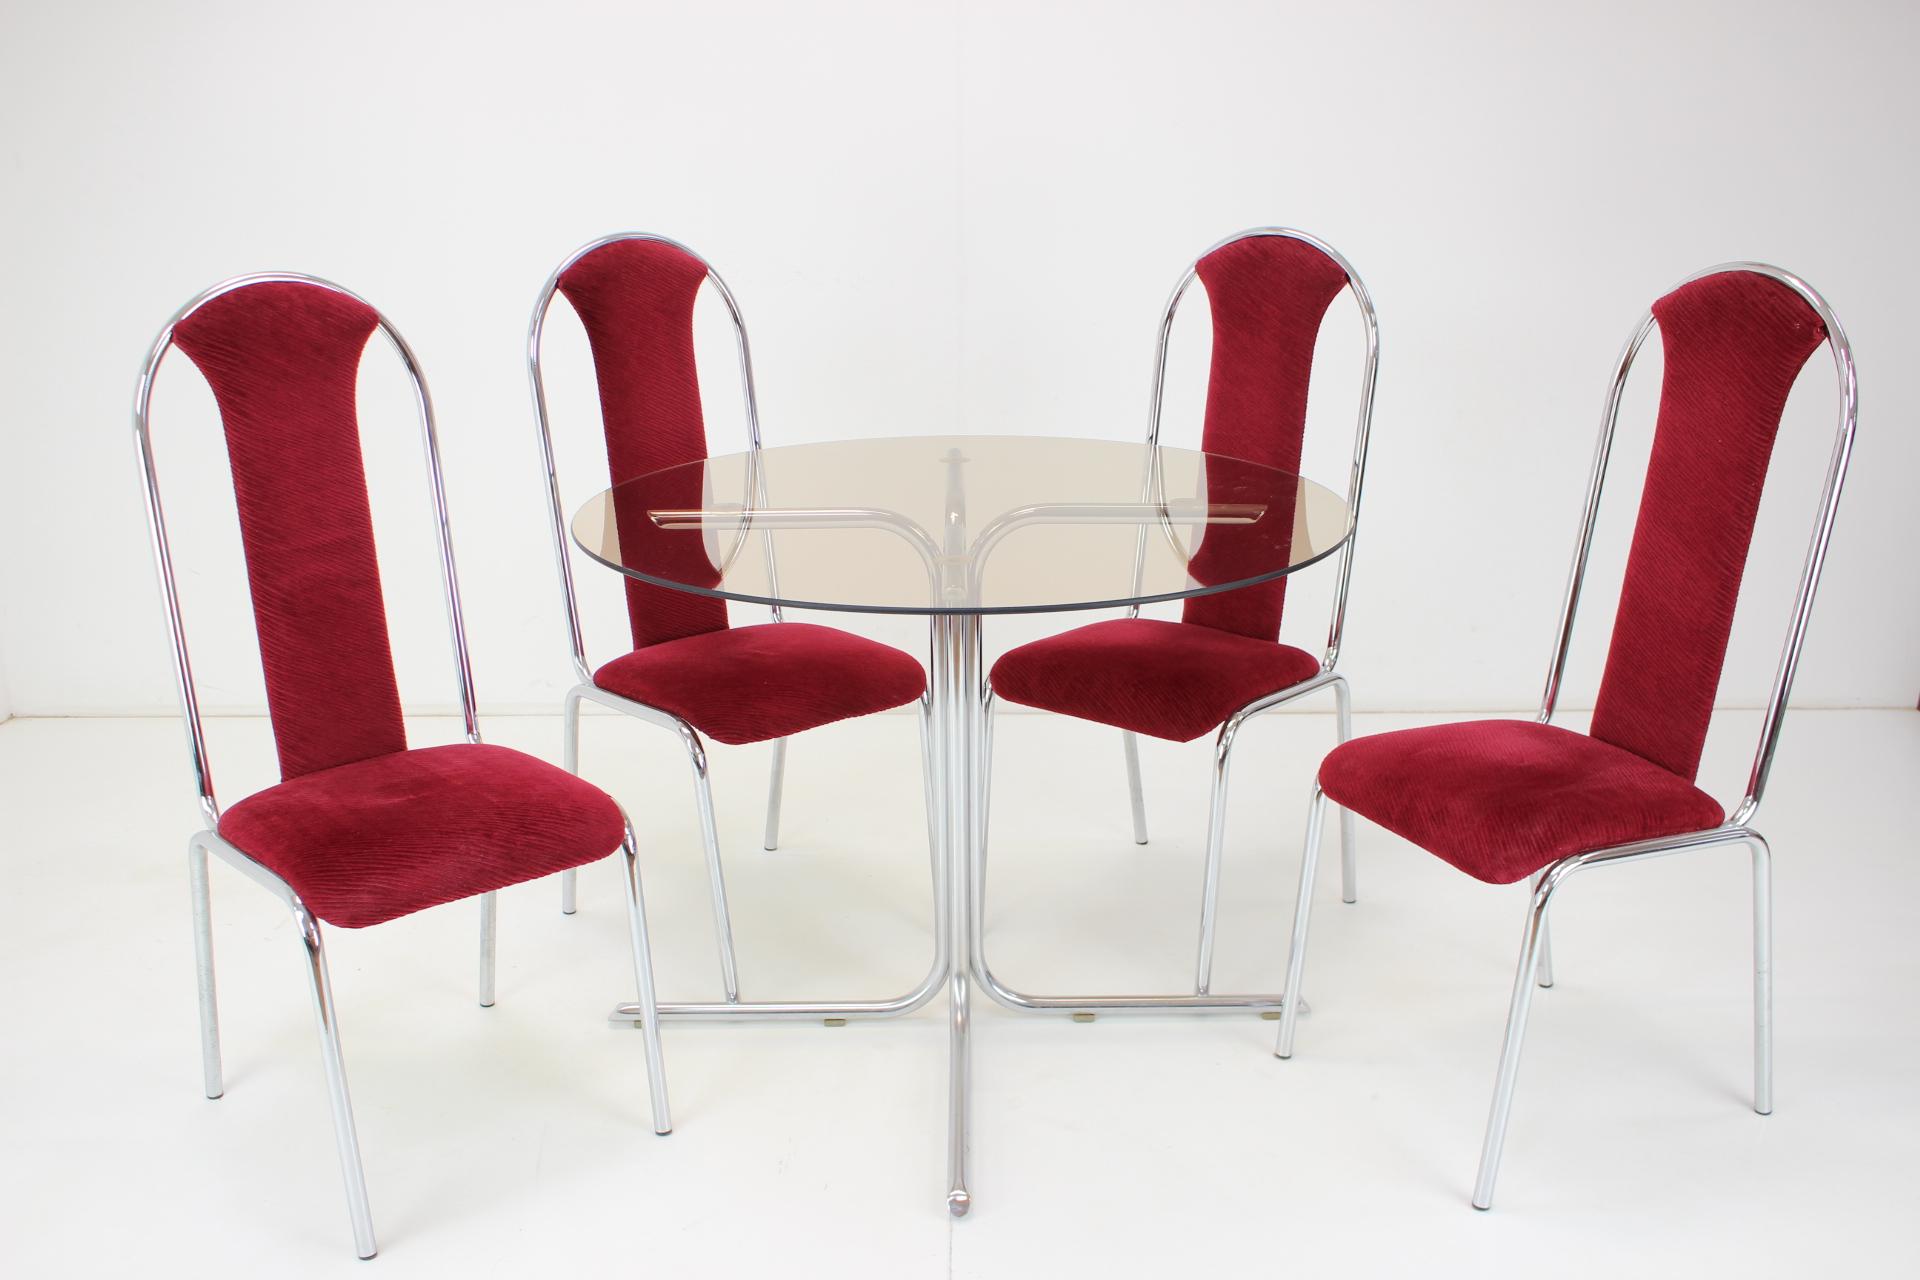 -Chrome has an old patina.
-Glass on scratches from normal use.
-There are stains on the glass that cannot be cleaned.
-Very design table and chairs.
-Seating height 46cm.
-Upholstered in very good original condition.